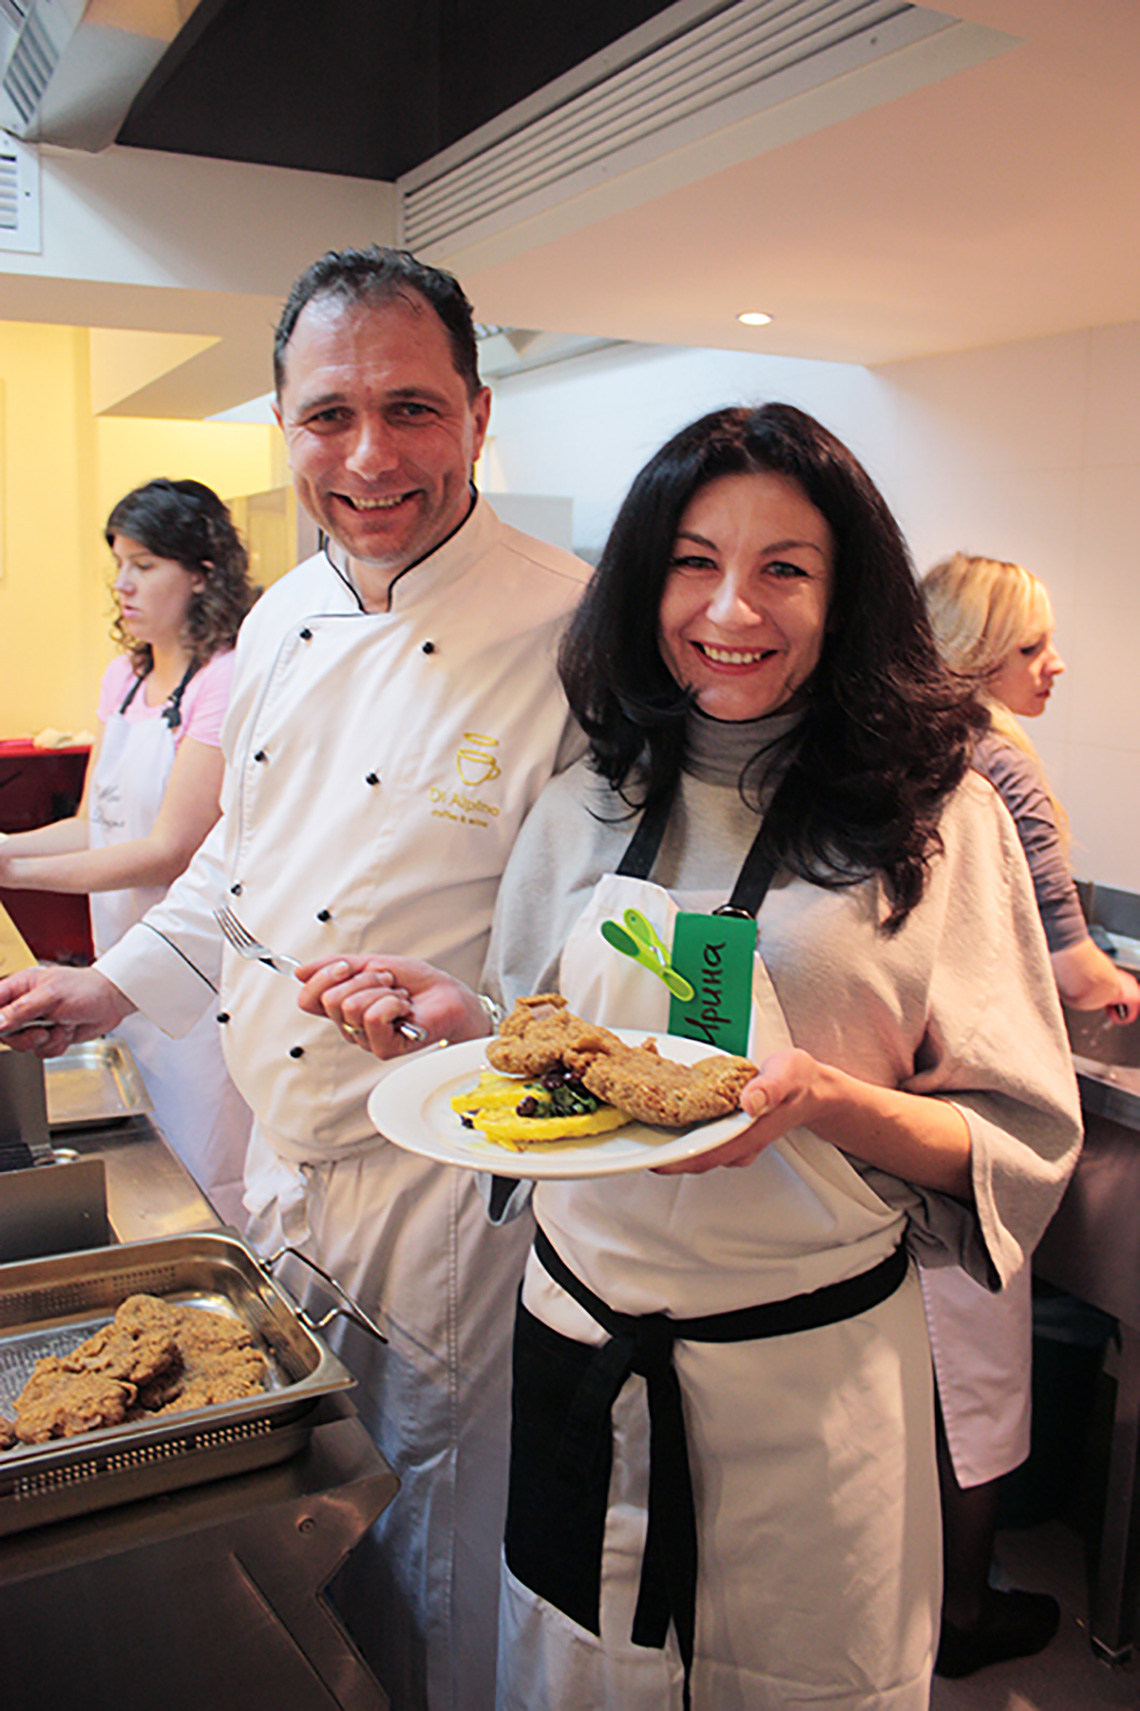 Schnitzel. Course "Culinary Traditions of Northern Italy". Cooking school in Ukraine.